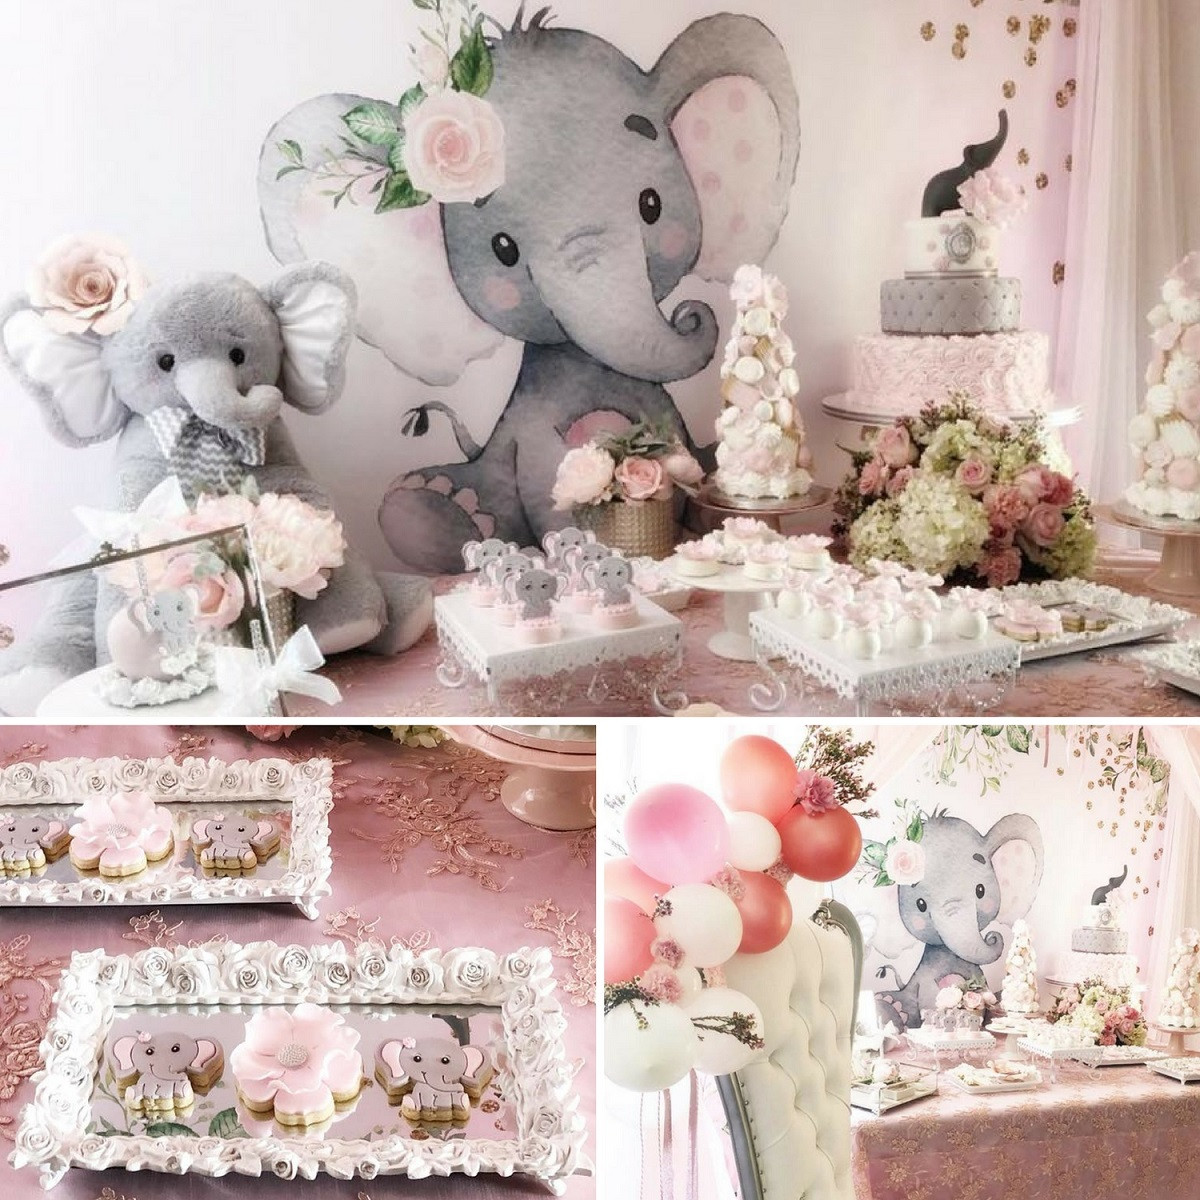 Elephant Decor For Baby Shower
 Pink And Gray Elephant Baby Shower Baby Shower Ideas